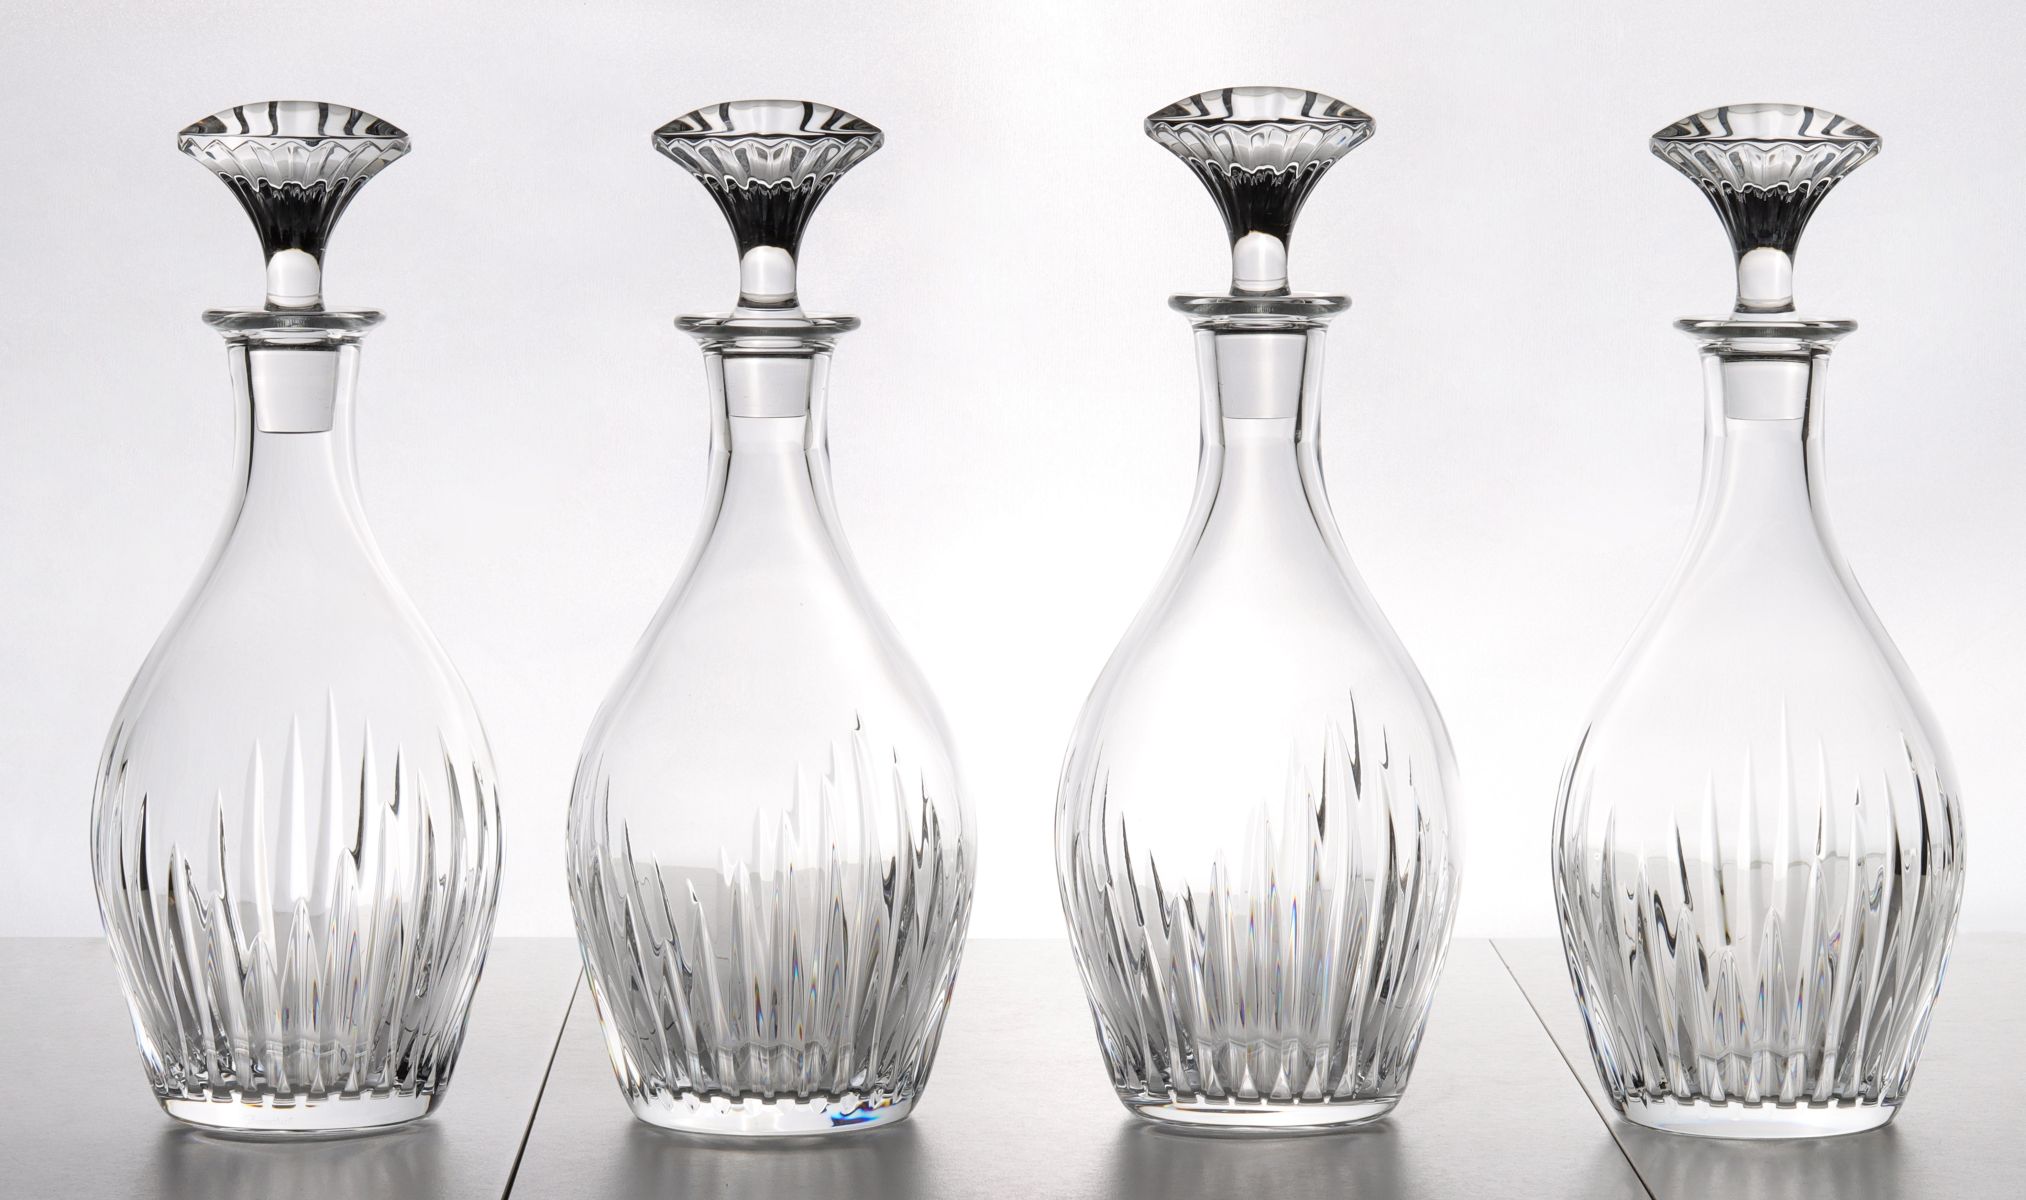 FOUR FRENCH CUT CRYSTAL DECANTERS